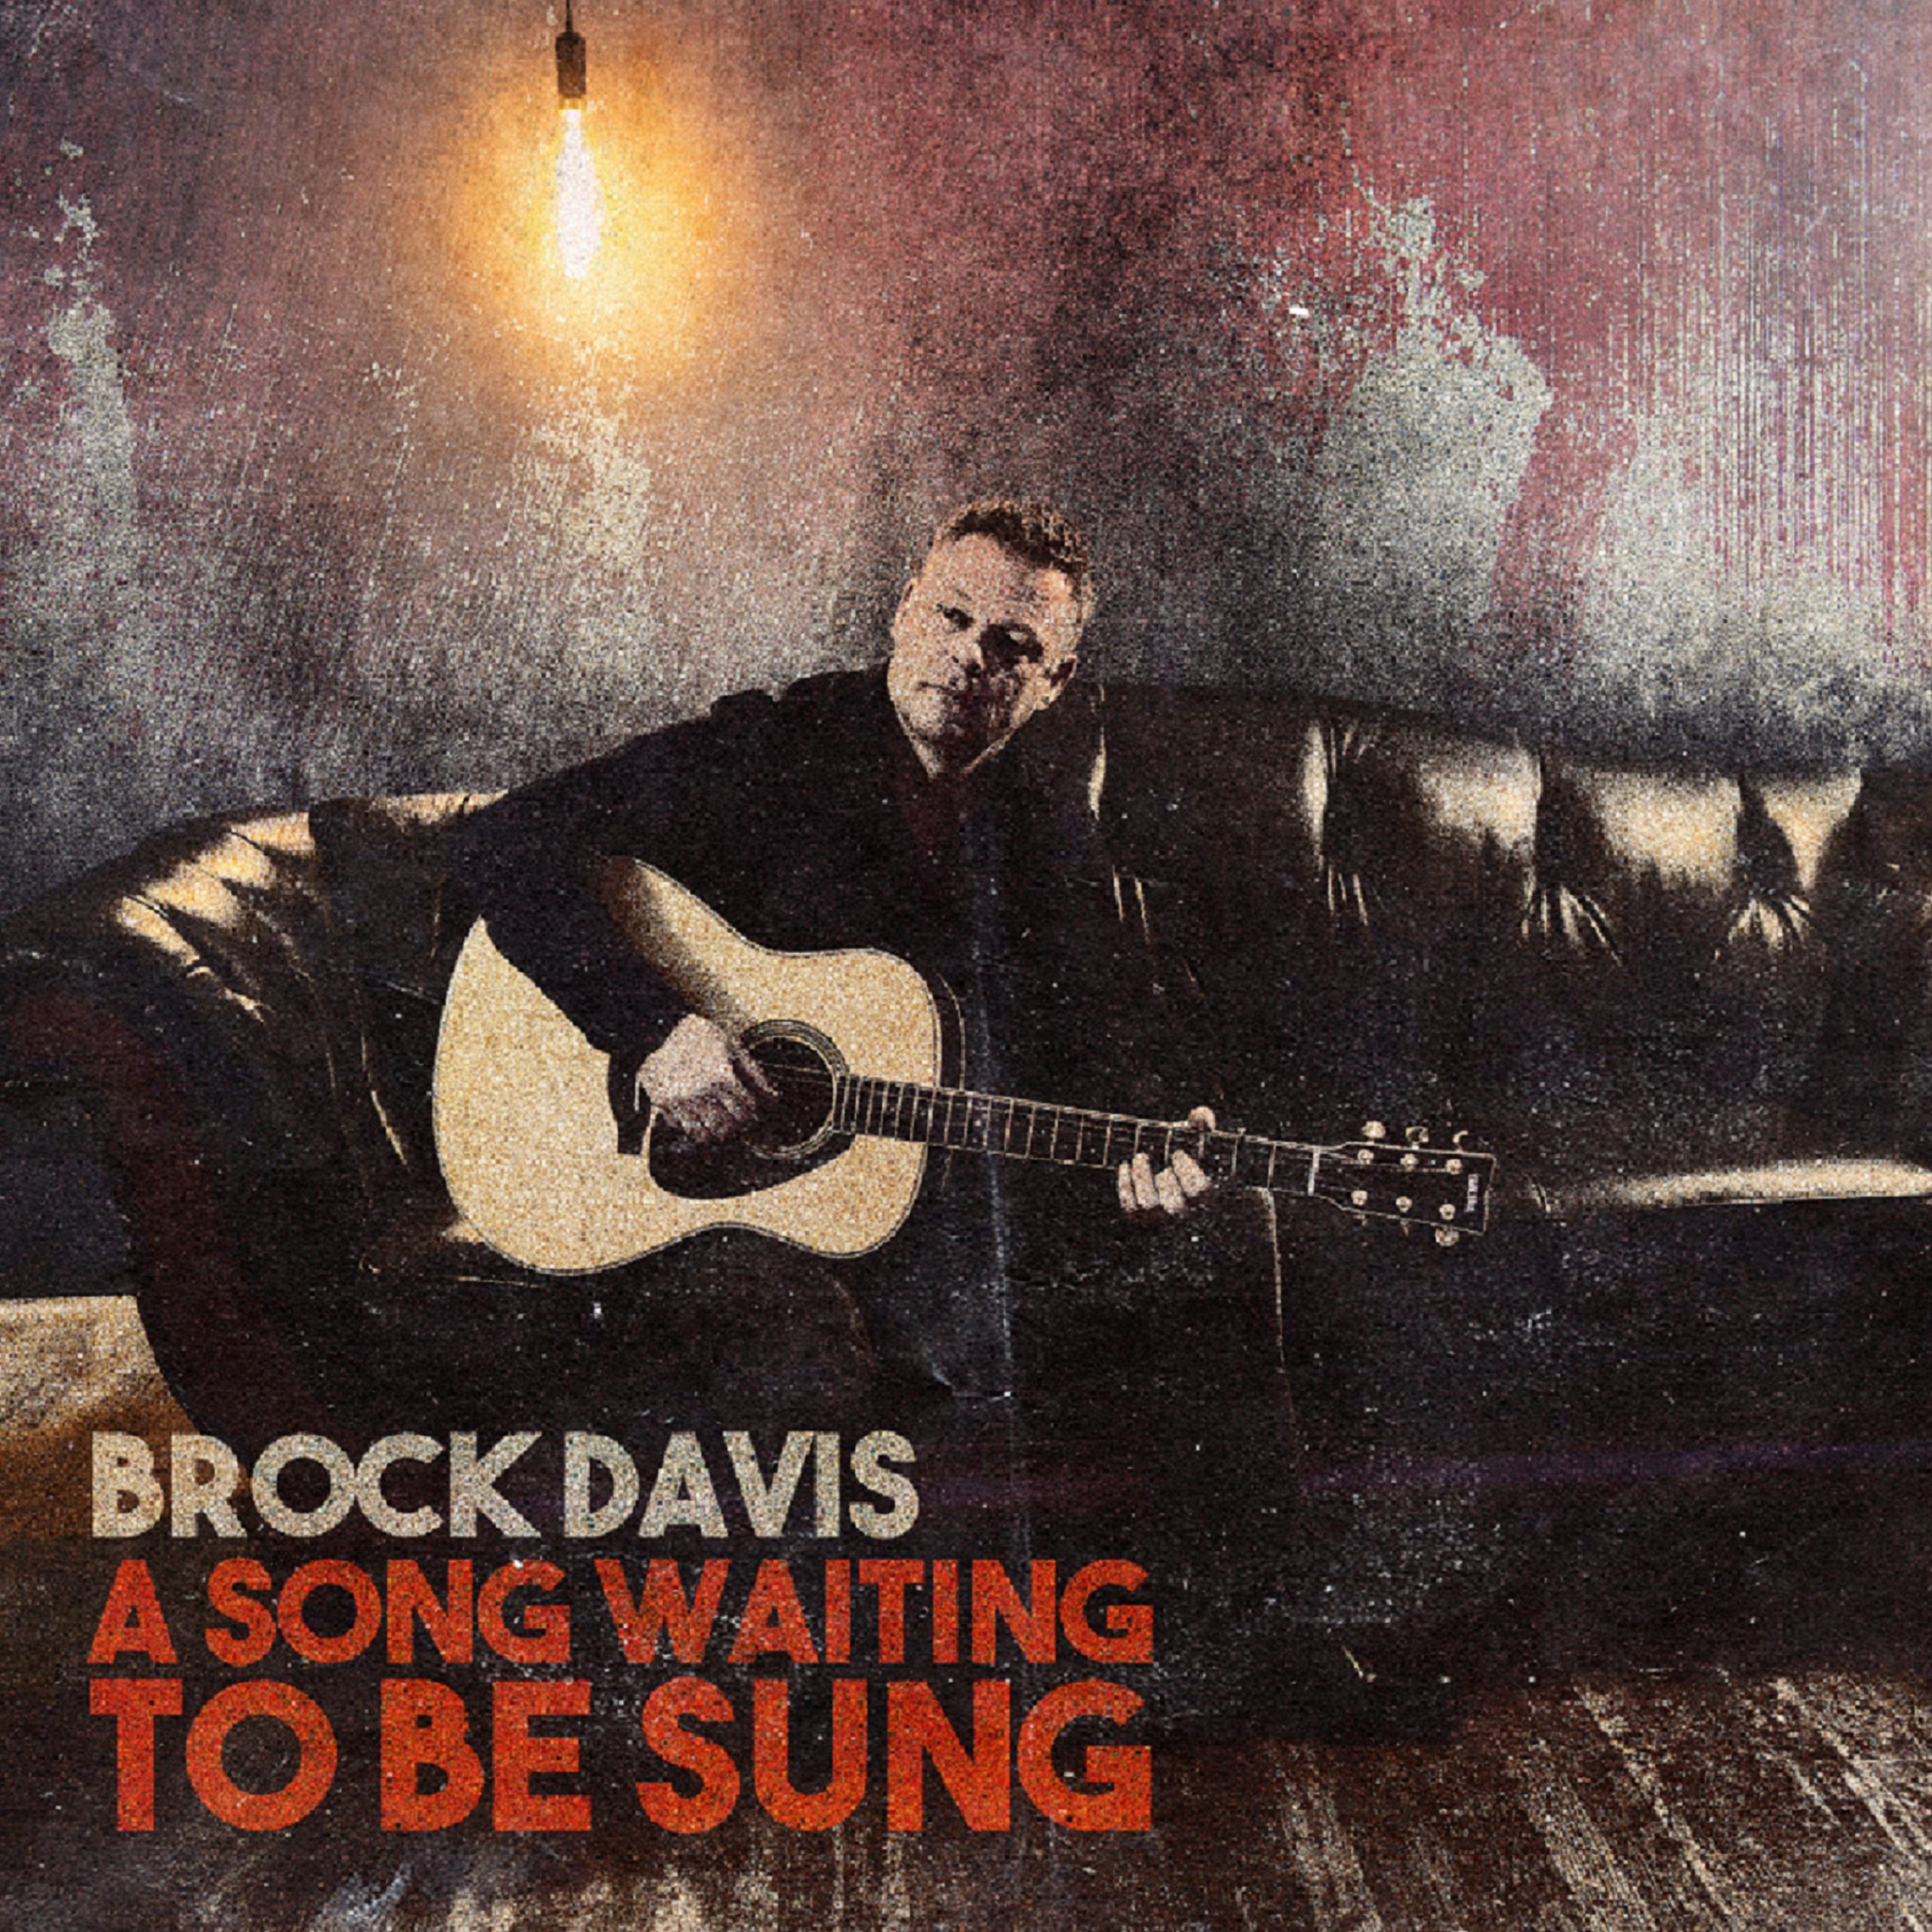 Brock Davis Set To Release New Americana album, “A Song Waiting To Be Sung”